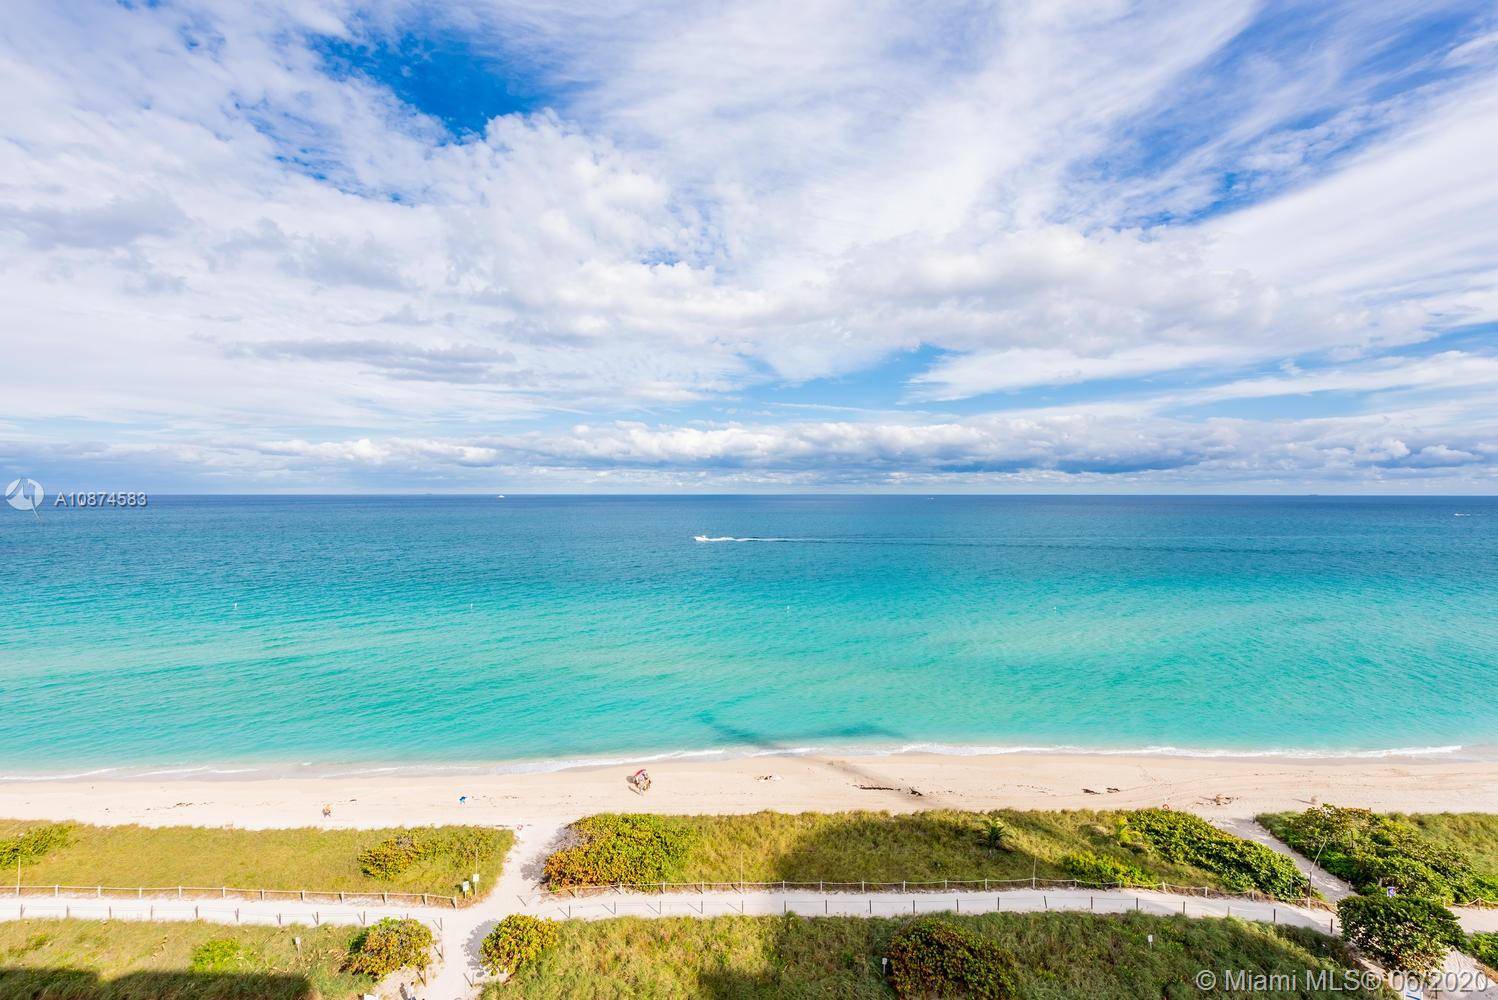 ONE OF A KIND BEACH PENTHOUSE TOP FLOOR UNIT WITH CAPTIVATING UNOBSTRUCTED UNPARALLELED DIRECT VIEWS OF THE OCEAN AND CITY SKYLINE !